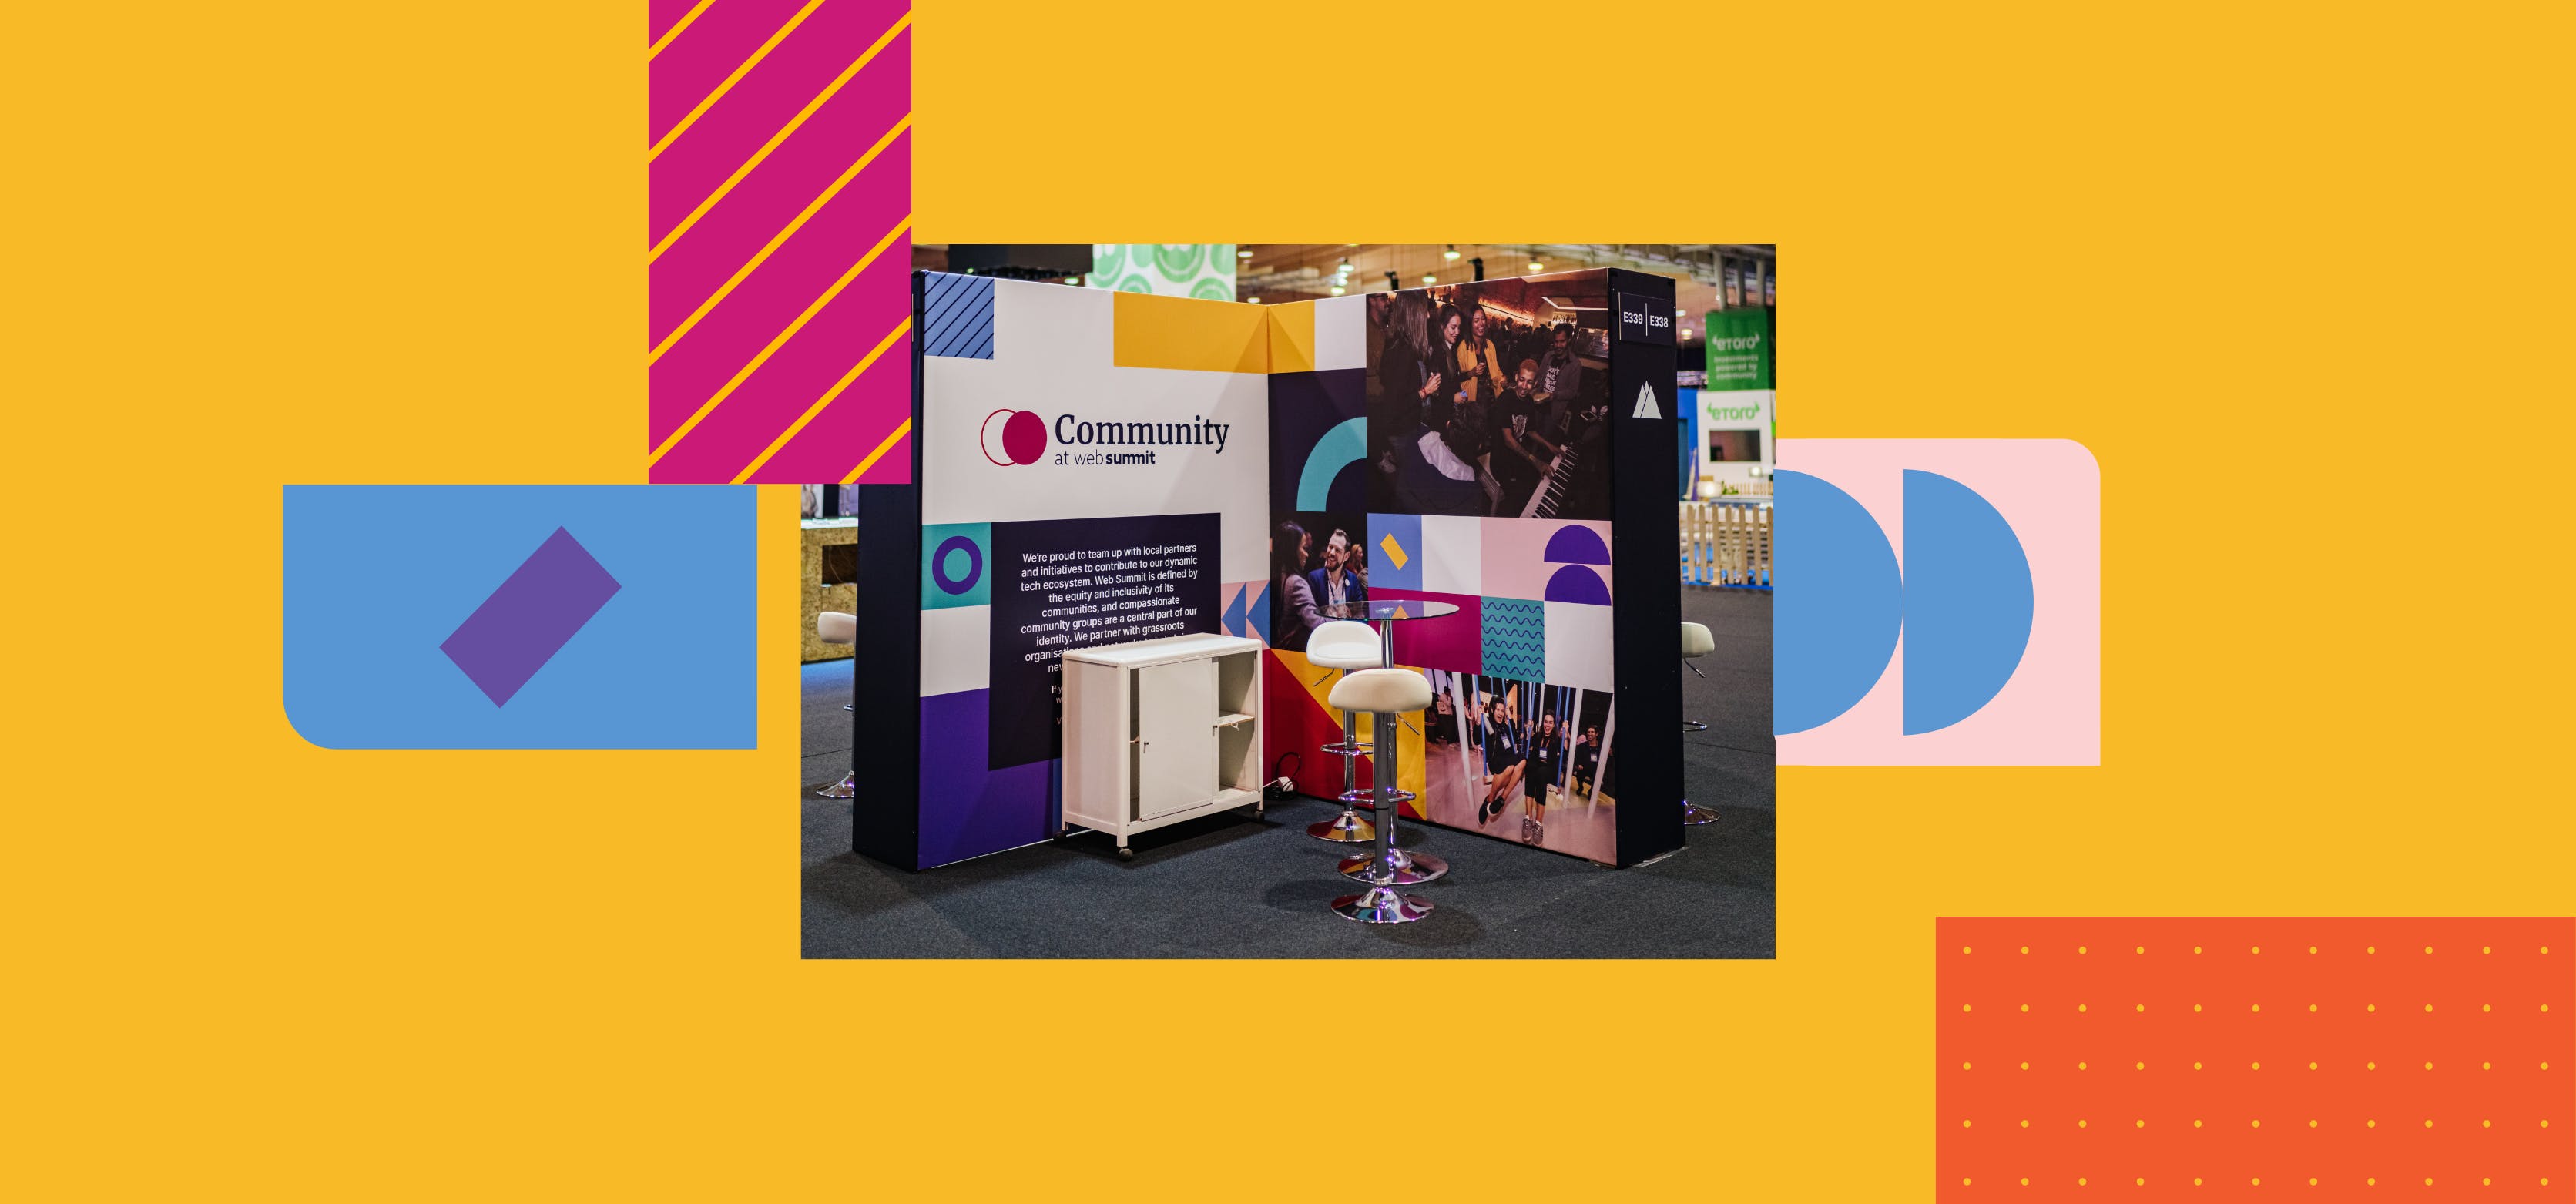 An image of a community exhibition stand at a pavilion during Web Summit. A storage unit, two chairs and a table with a glass top are in the image.